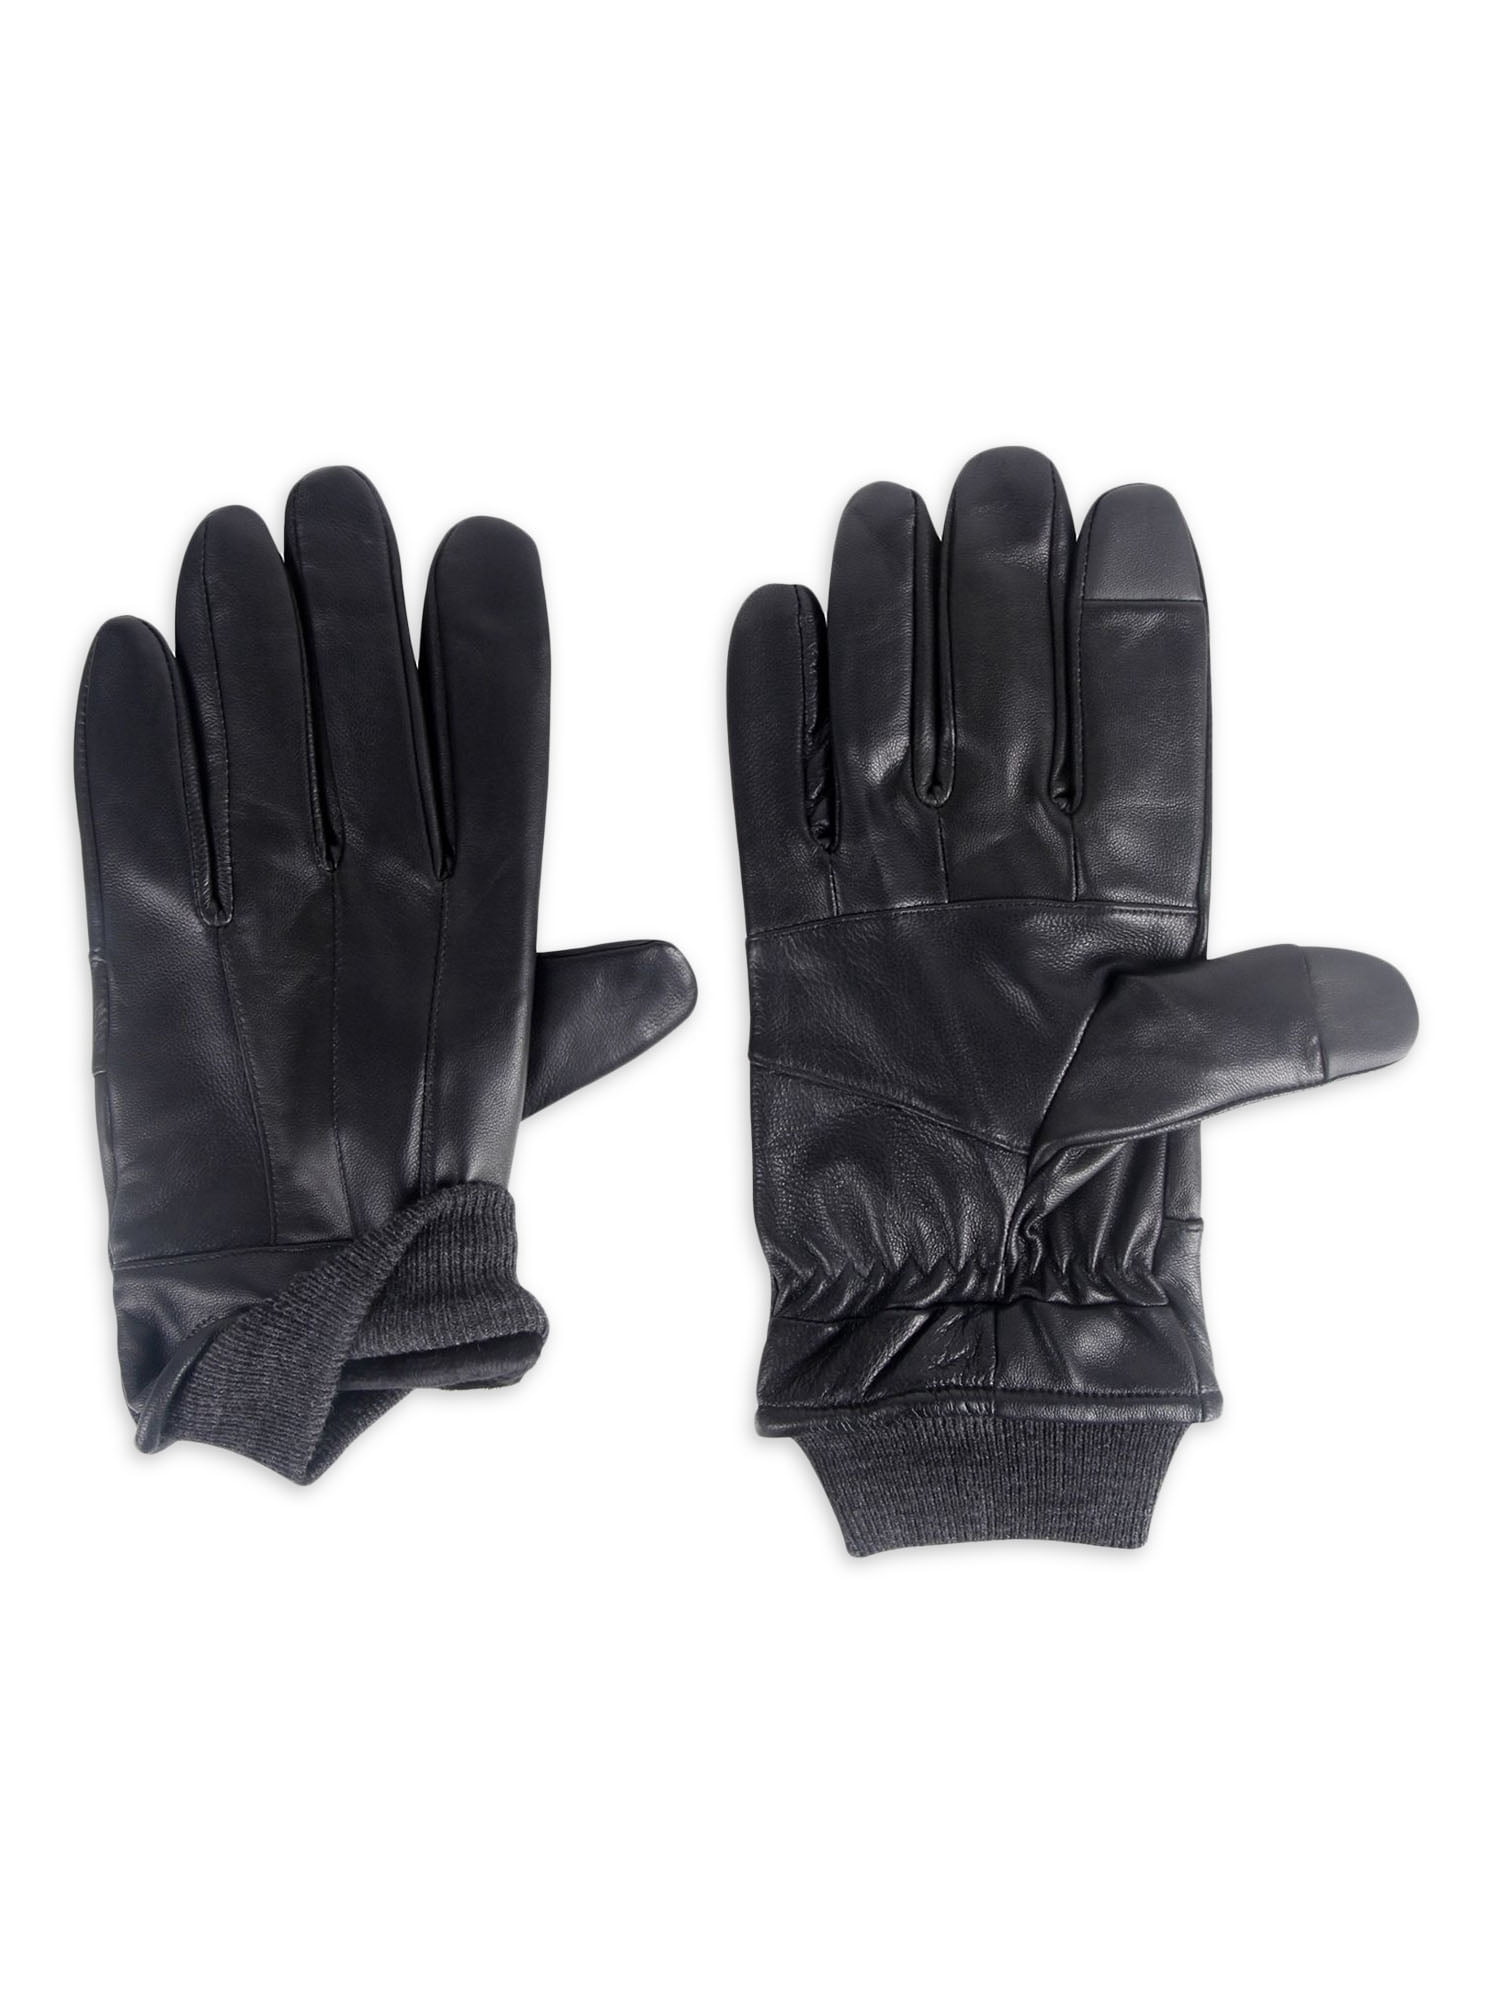 Jos A Bank Men's Thinsulate-Lined Lambskin Leather Glove Winter Black M L XL 